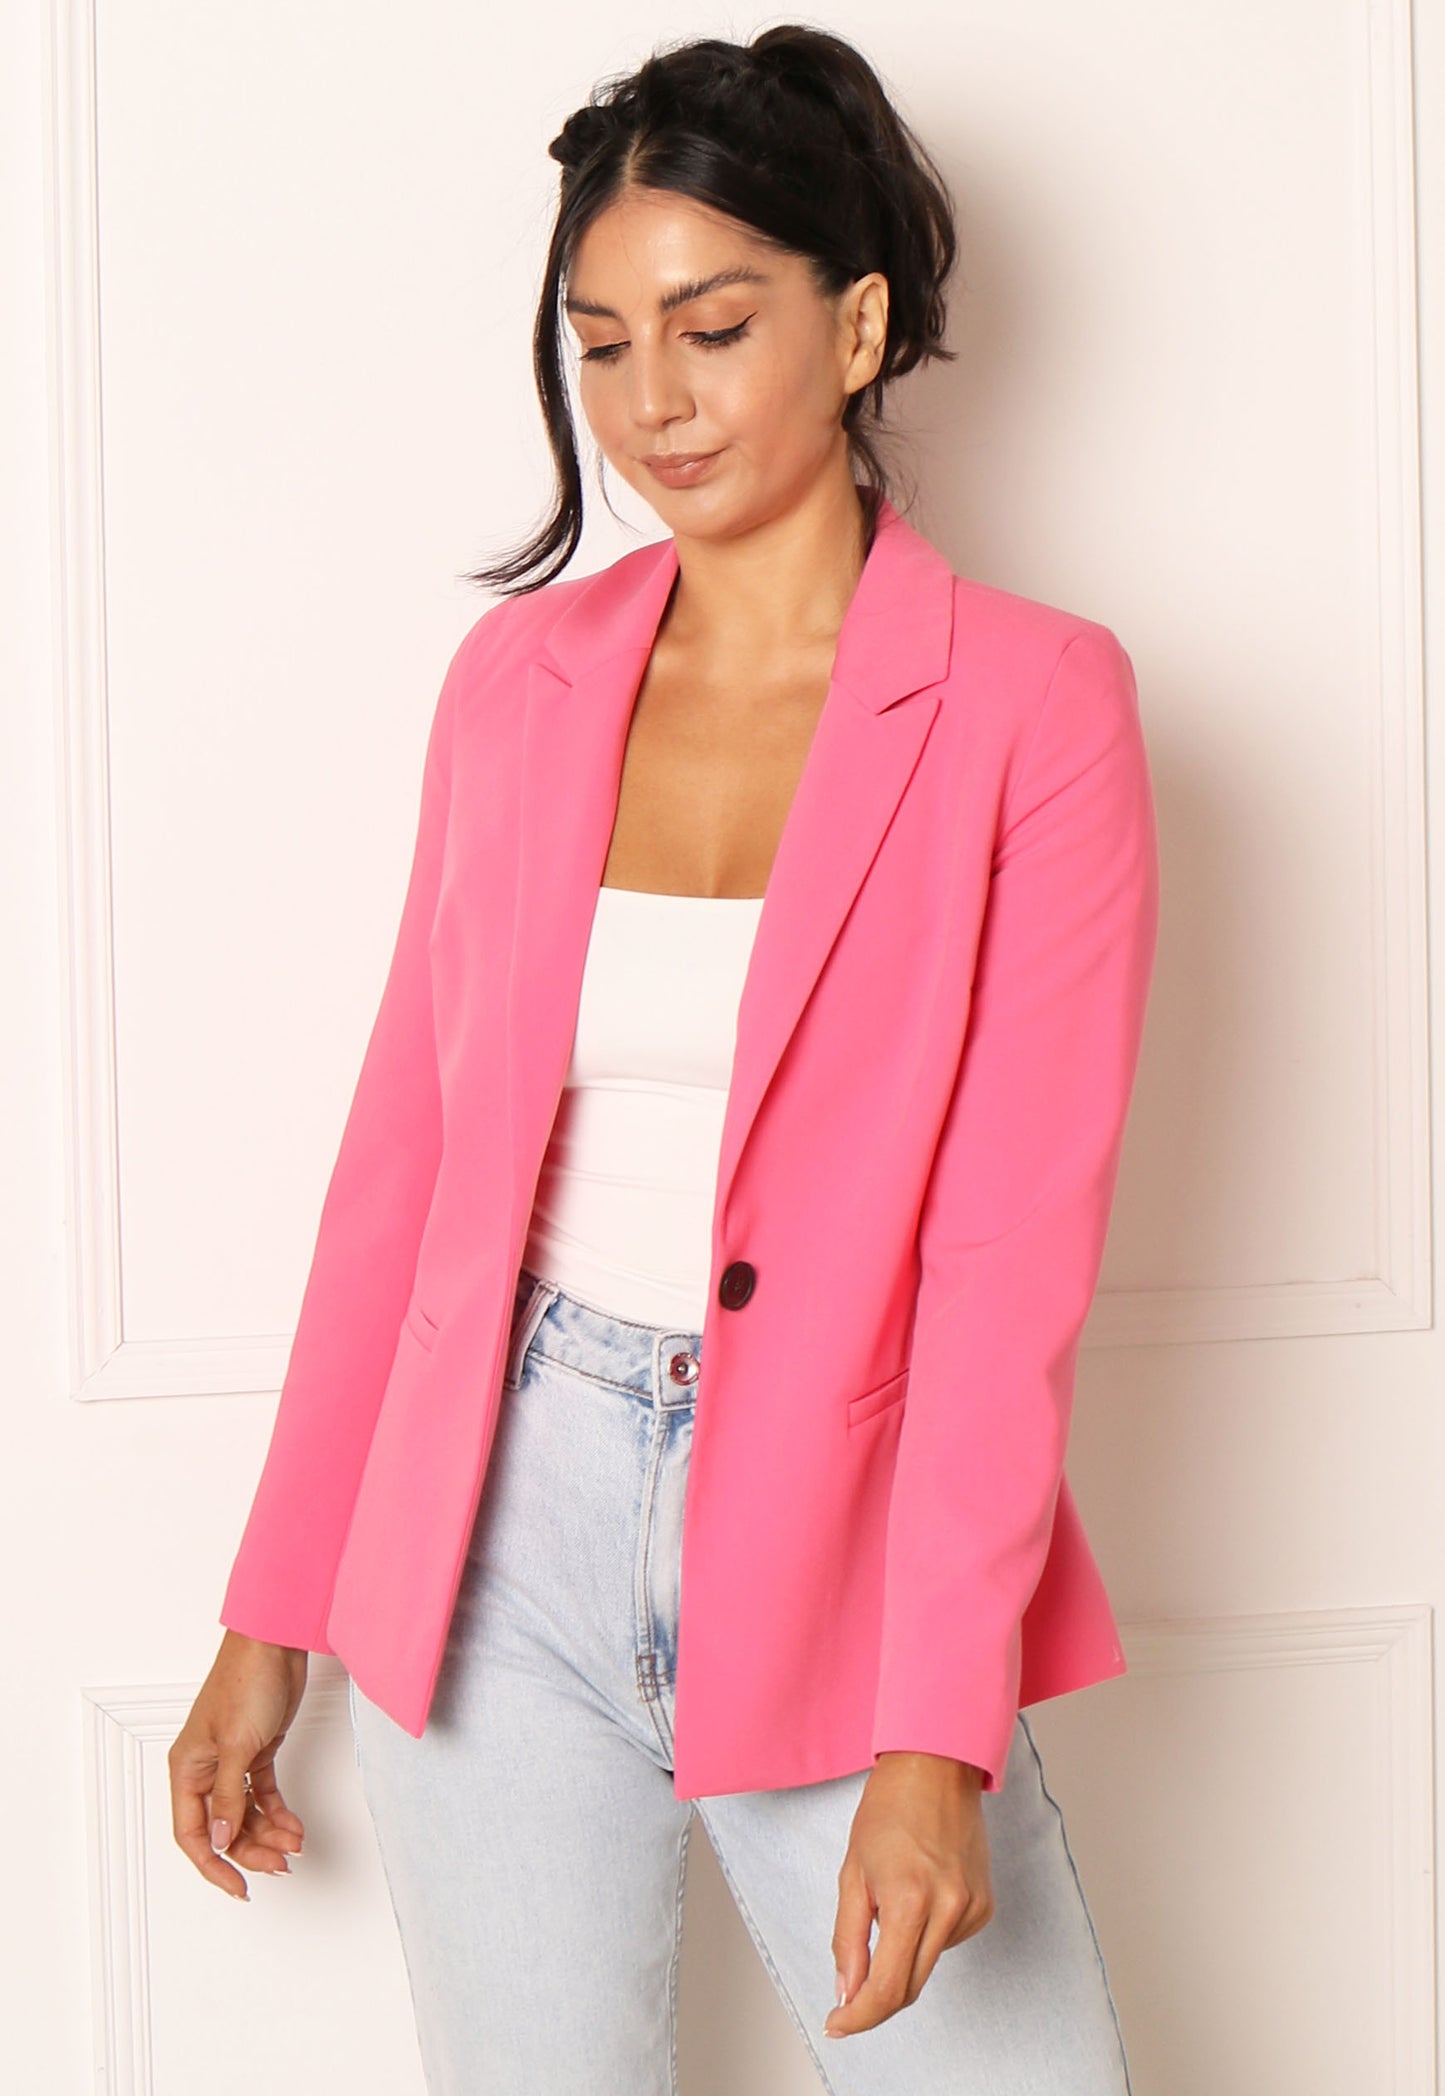 VERO MODA Sandy Classic Fitted Blazer in Hot Pink - One Nation Clothing